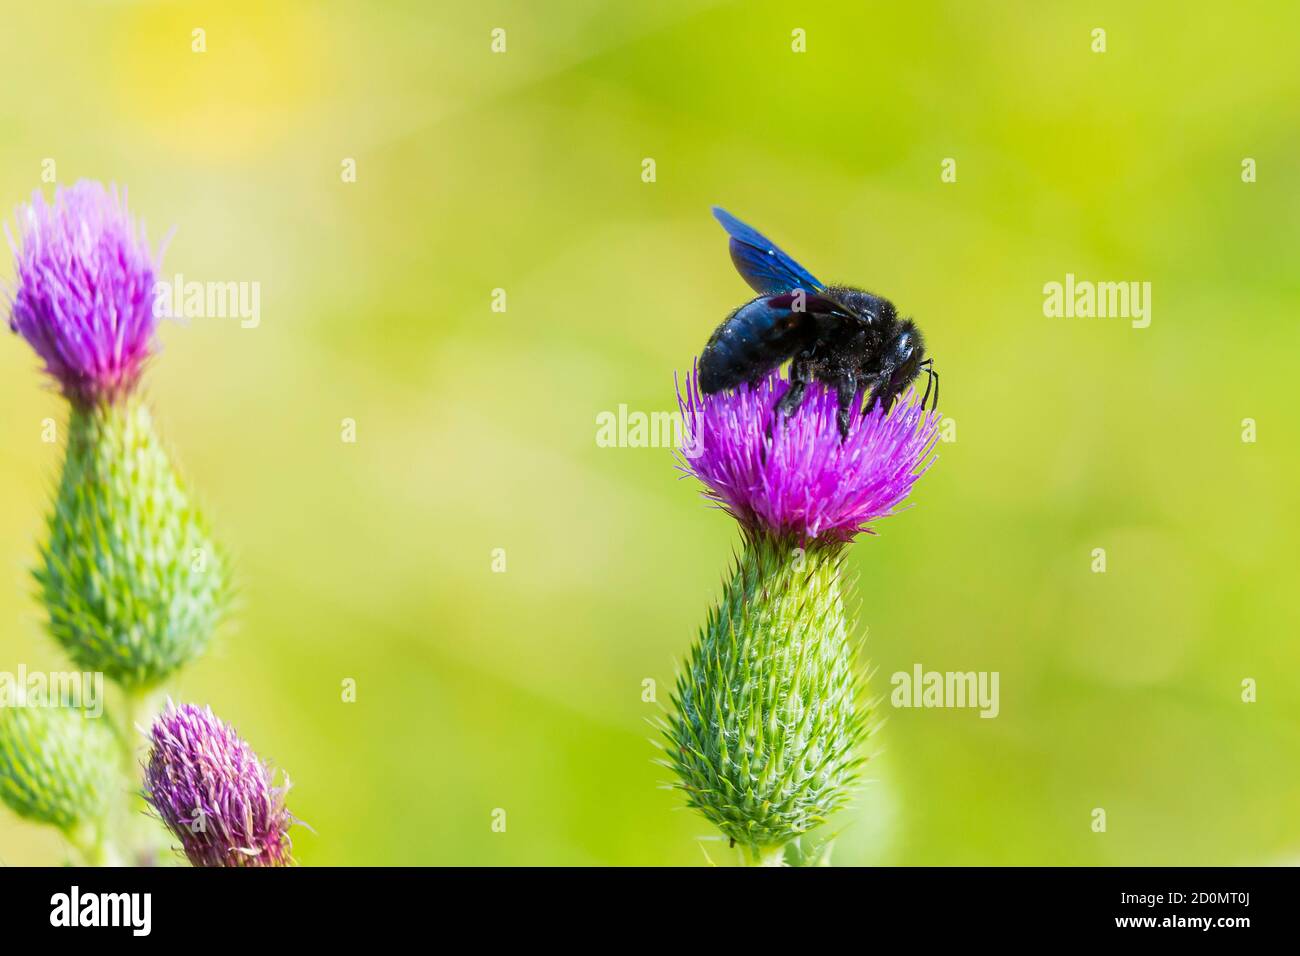 Xylocopa violacea, violet carpenter bee, pollinating on purple thistle flowers in a green meadow Stock Photo